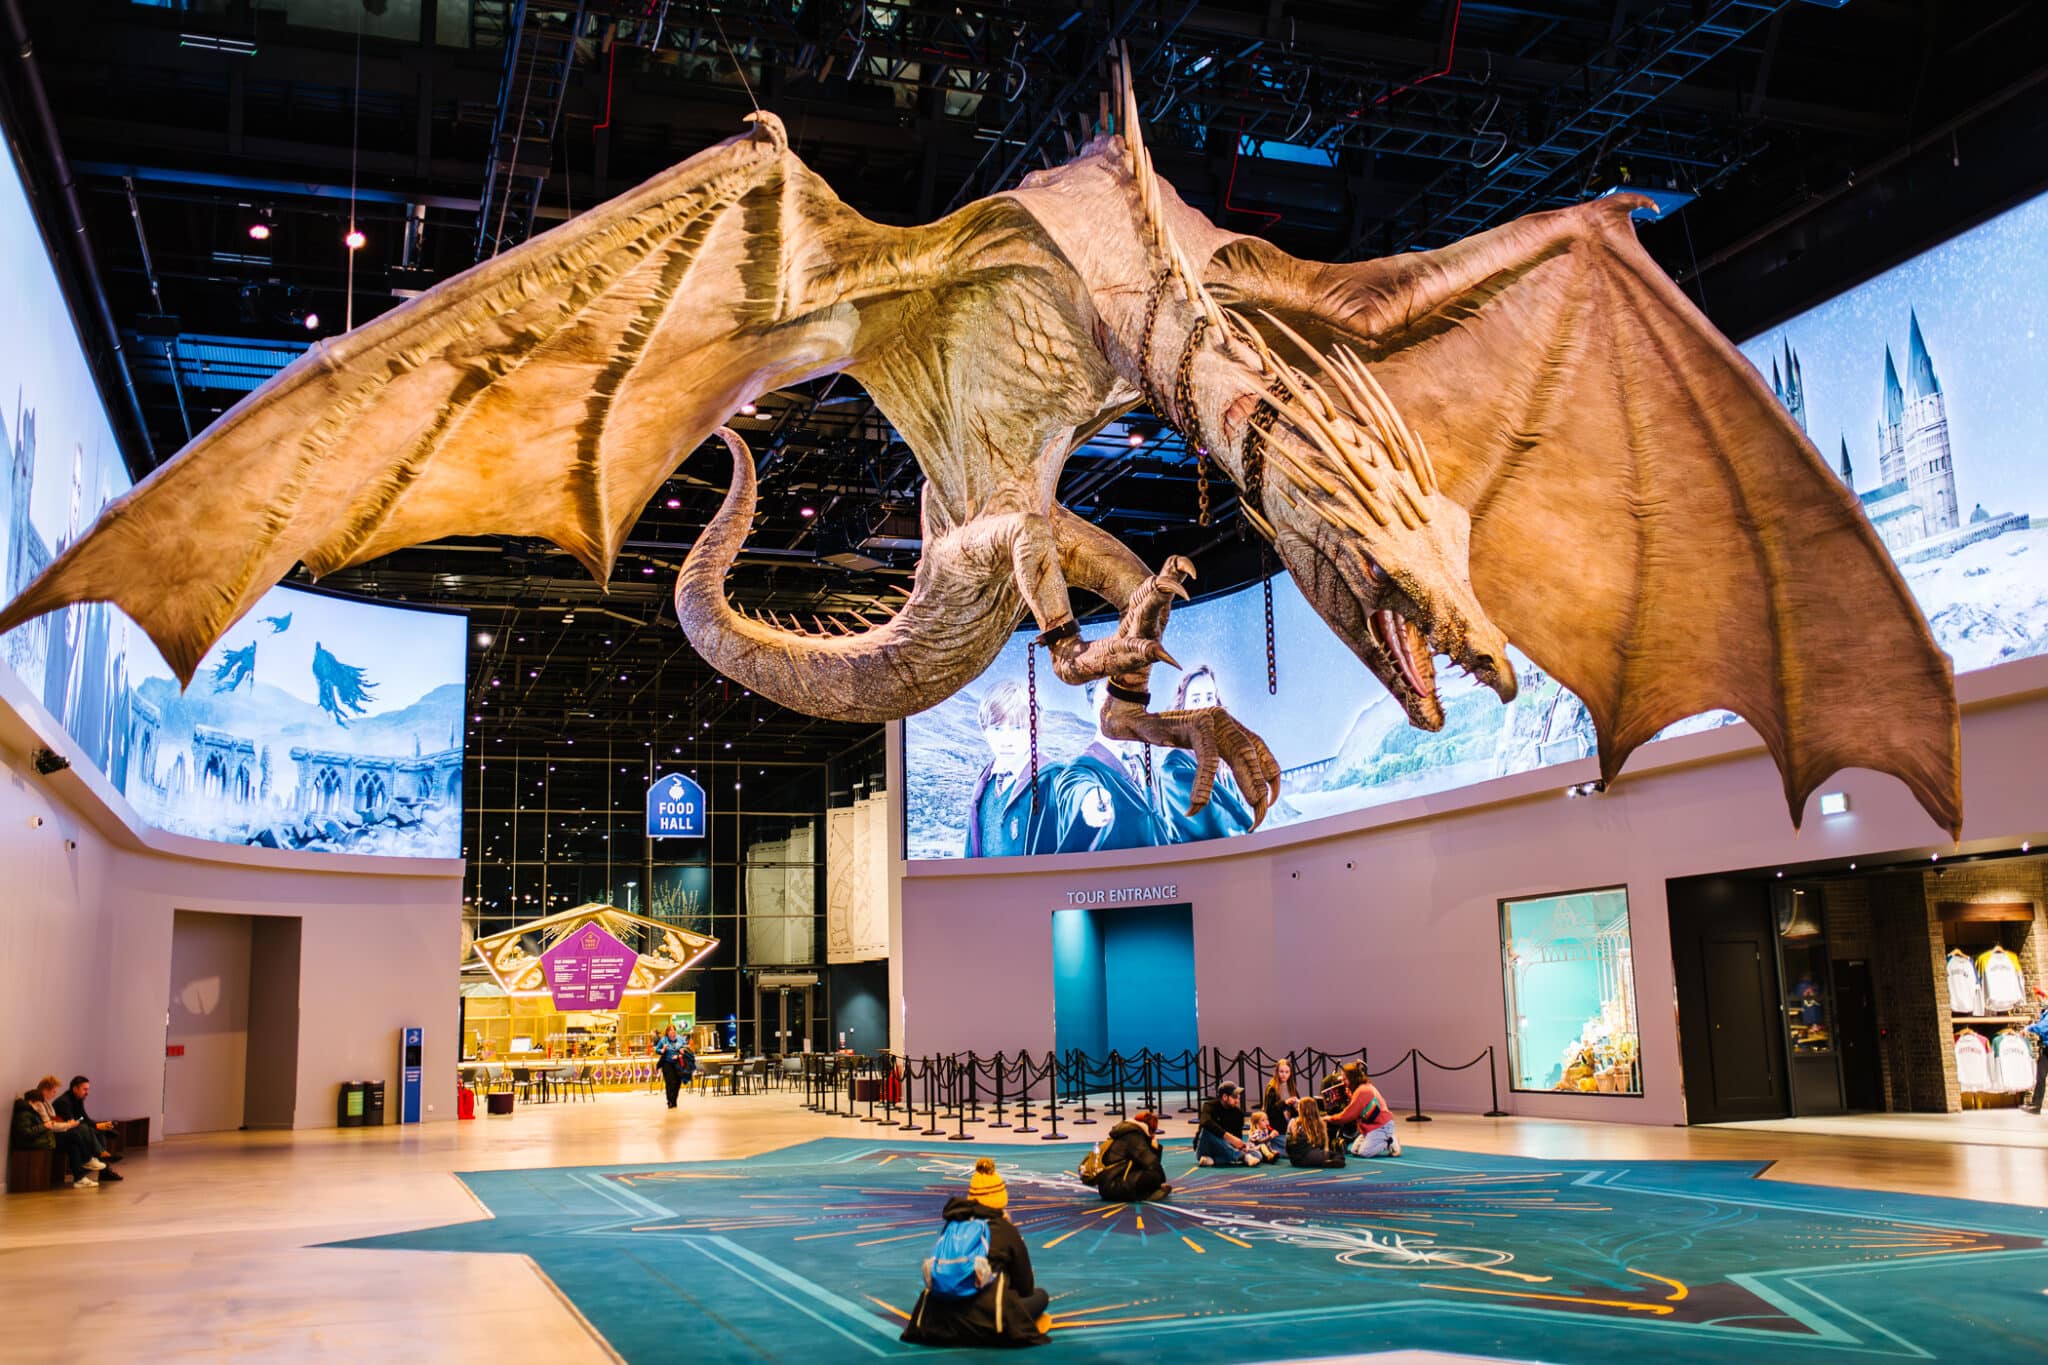 Harry Potter Studio Tour London Atrium welcoming area with dragon flying overhead. 